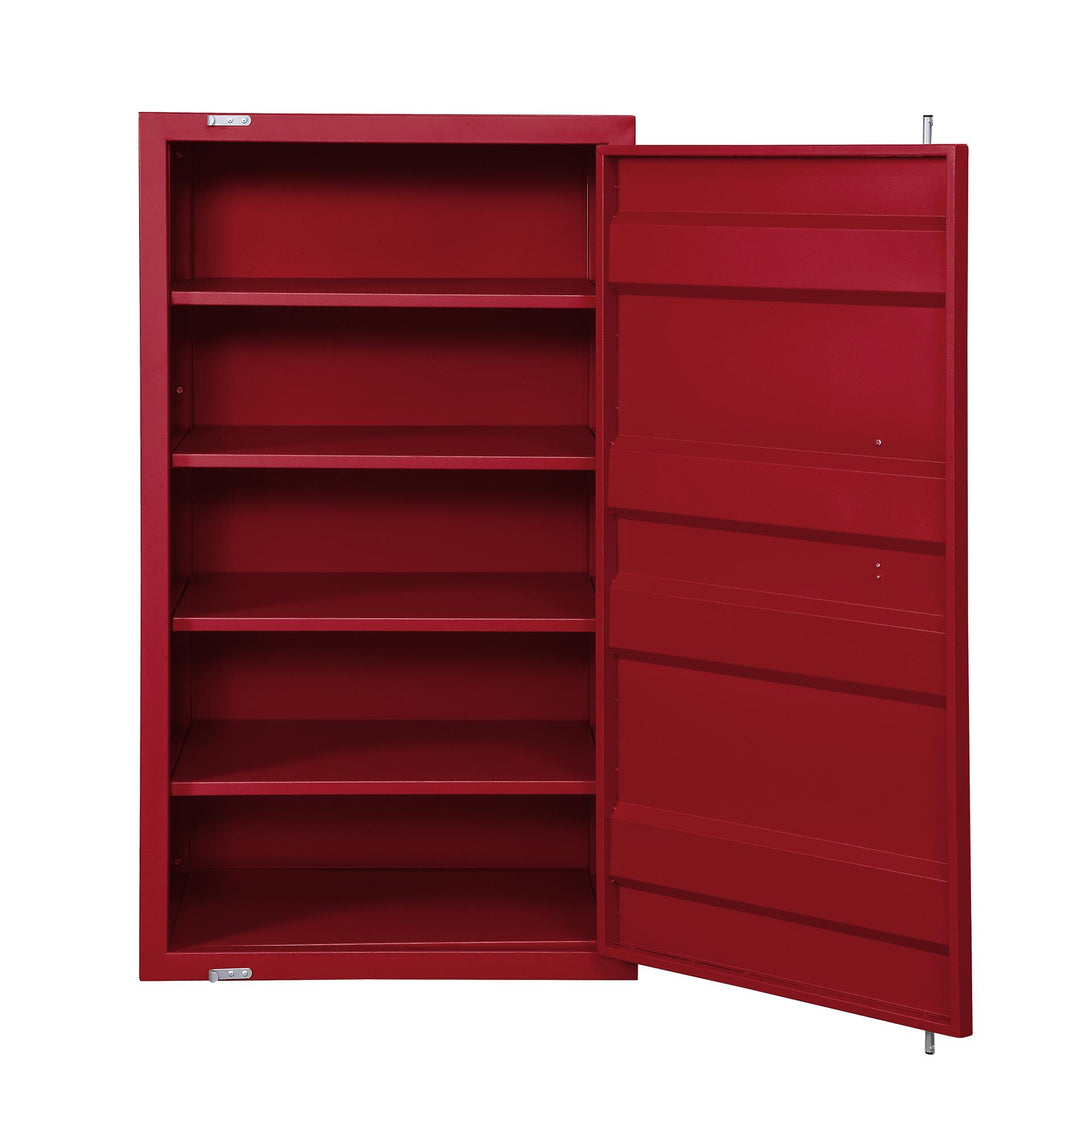 Metal shelves 5 storage cargo chest - Red